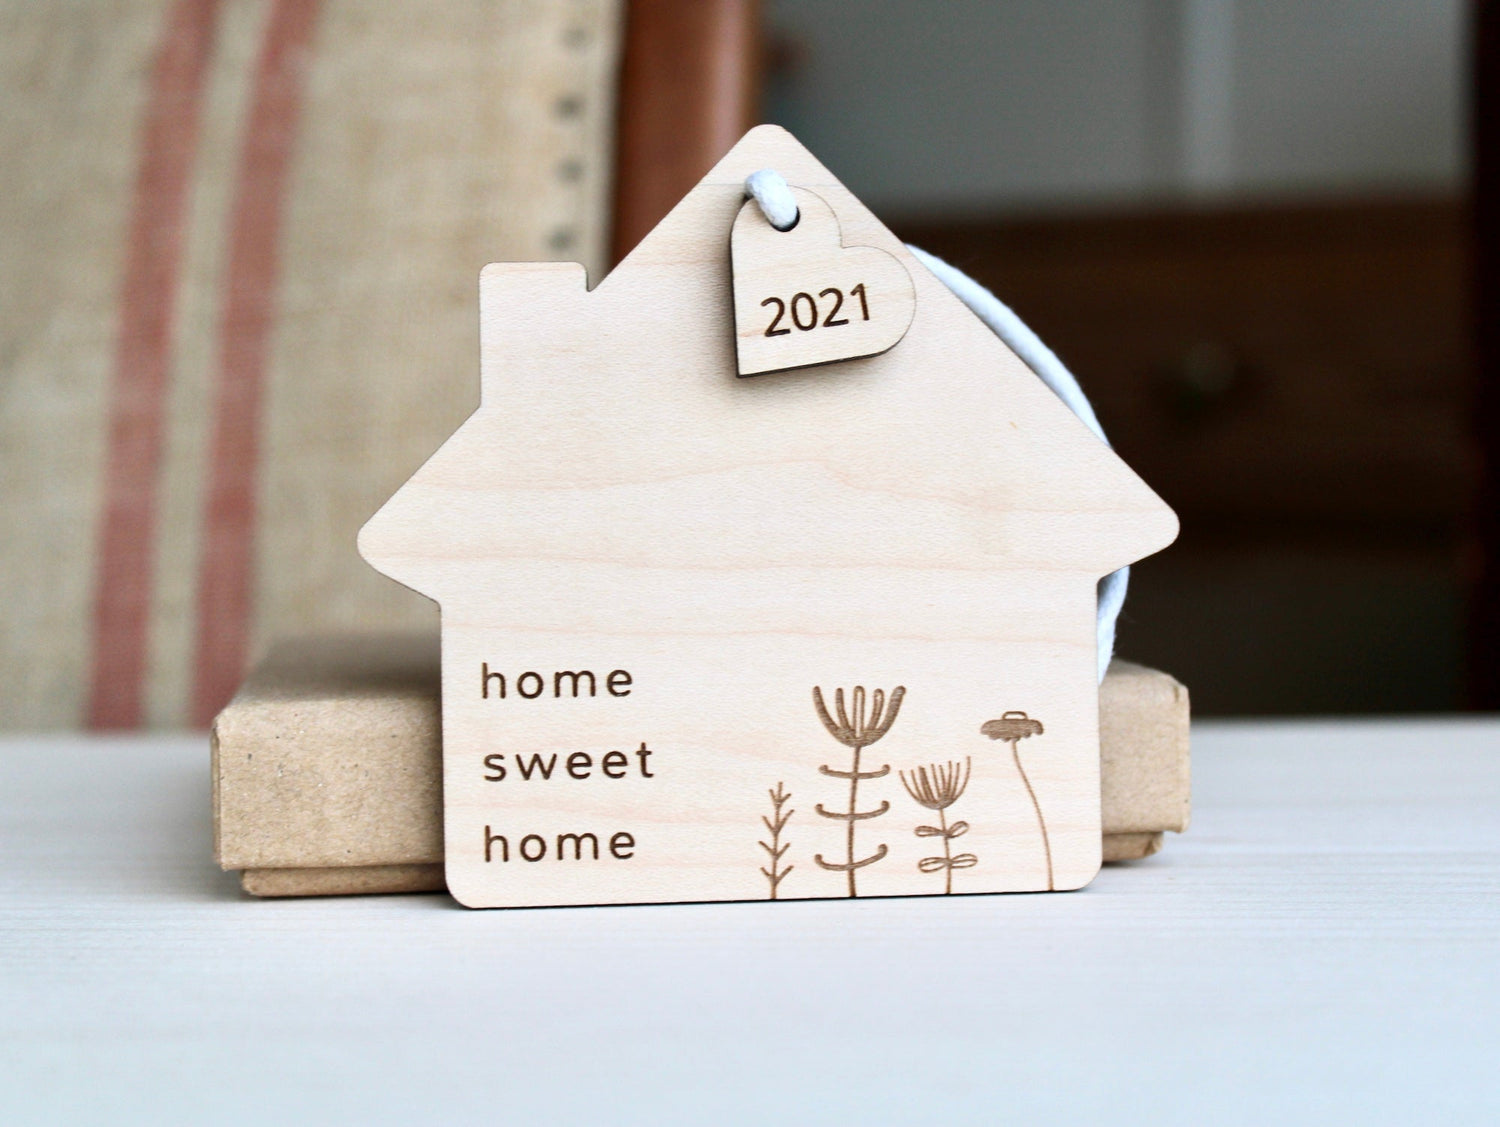 House shaped wooden decoration engraved with home sweet home and a flower design